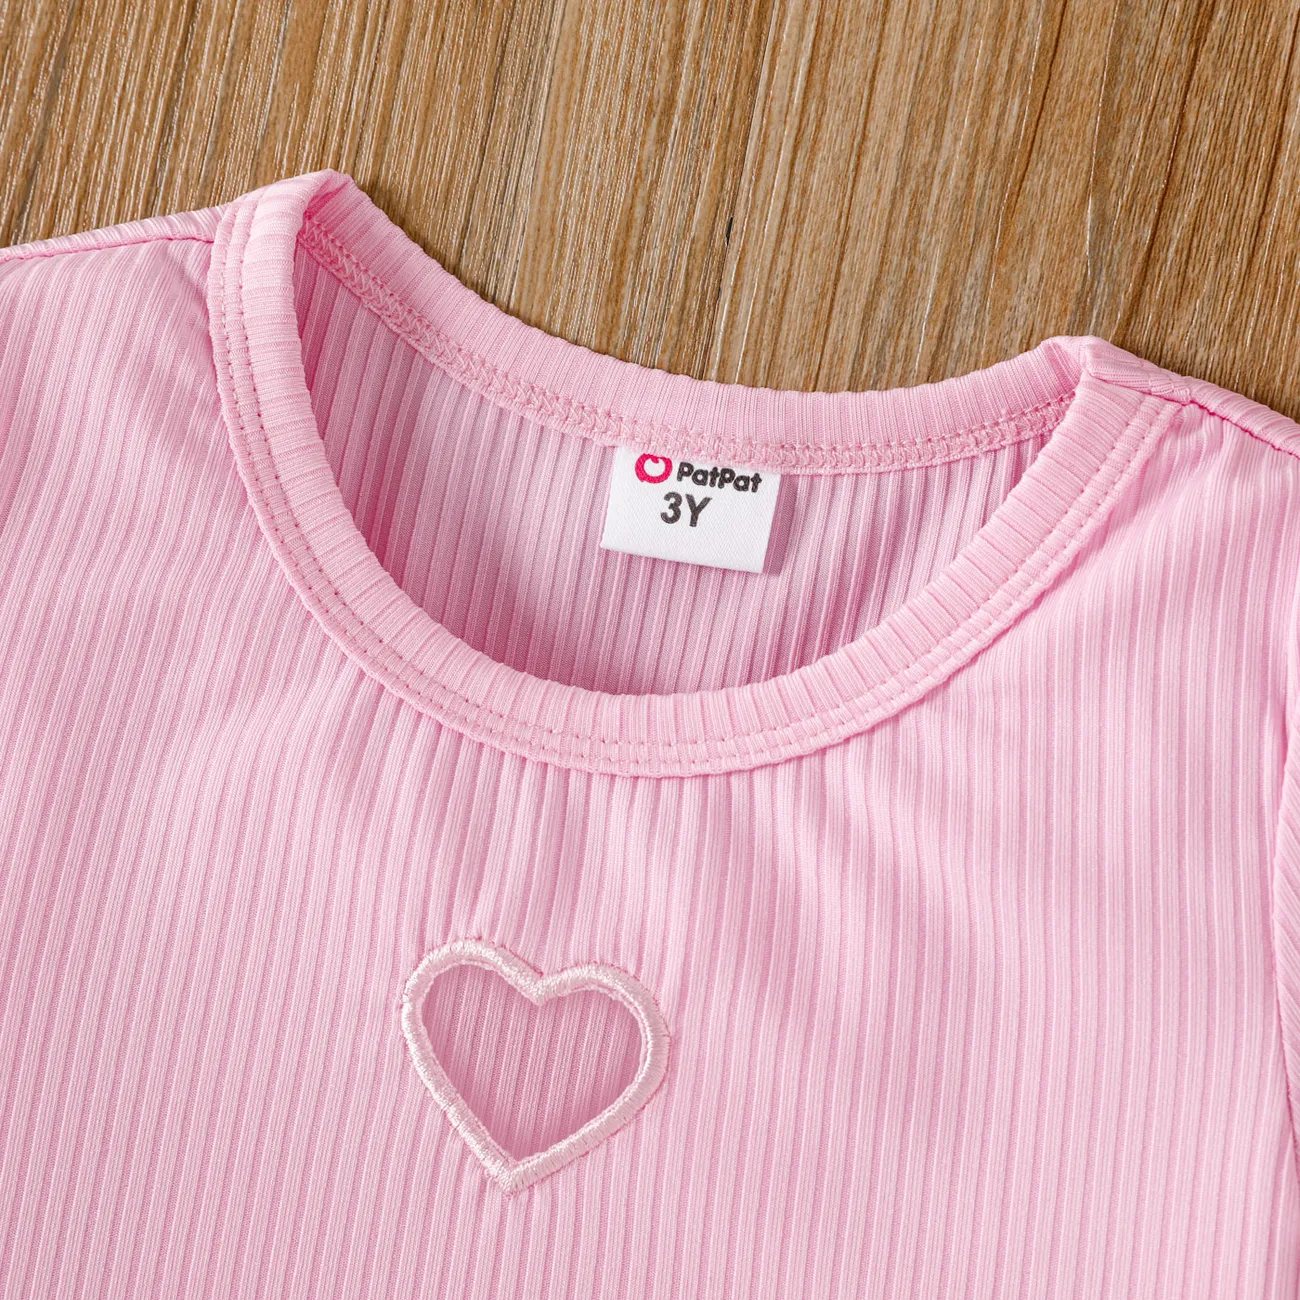 Toddler Girl Heart Hollow Out Lettuce Trim Rib-knit Tee Pink big image 1